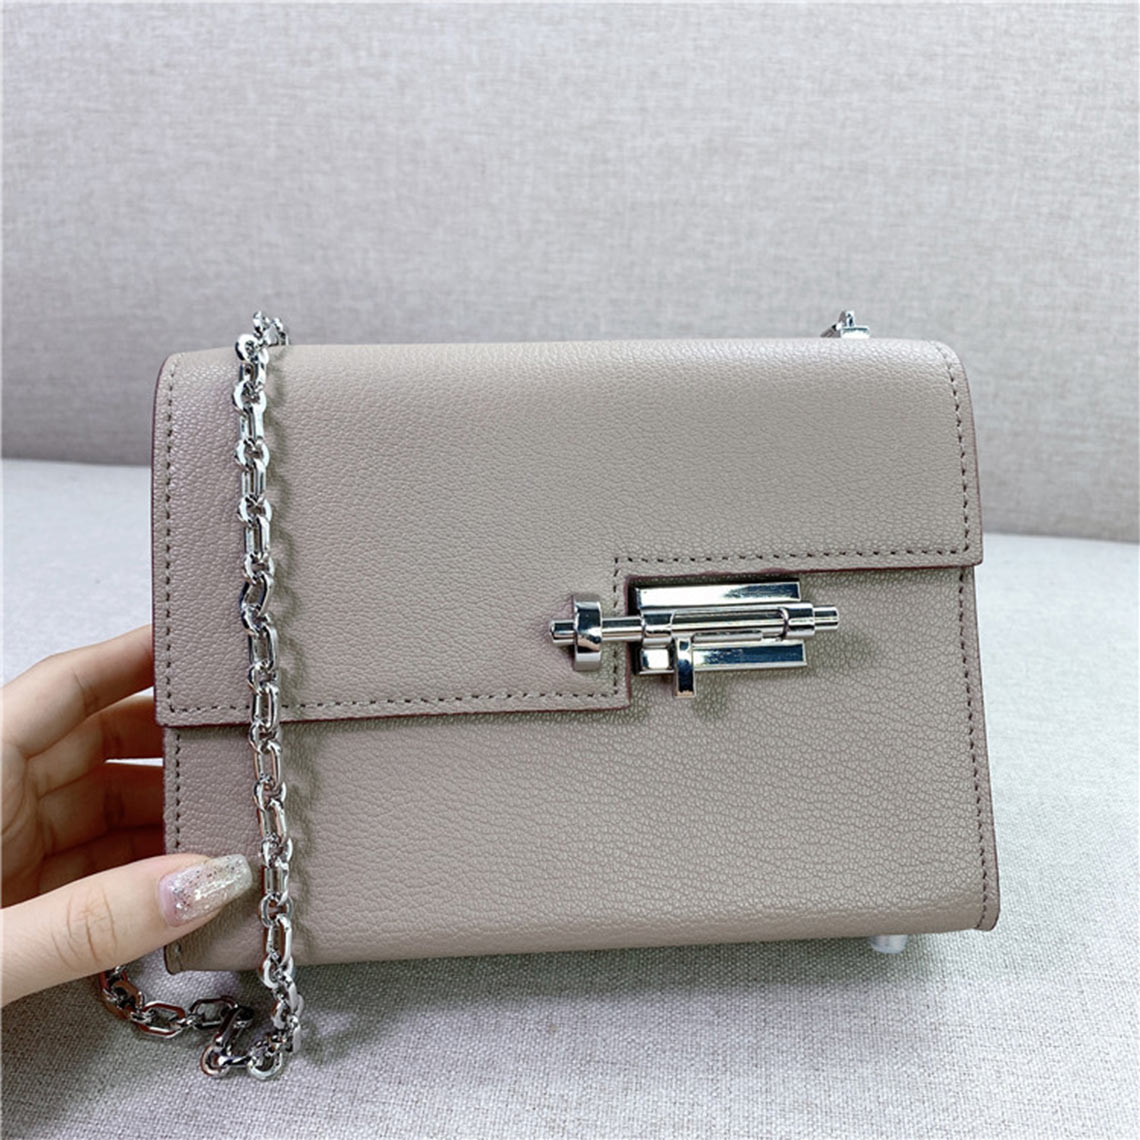 Khaki Leather Bag with Silver Chain